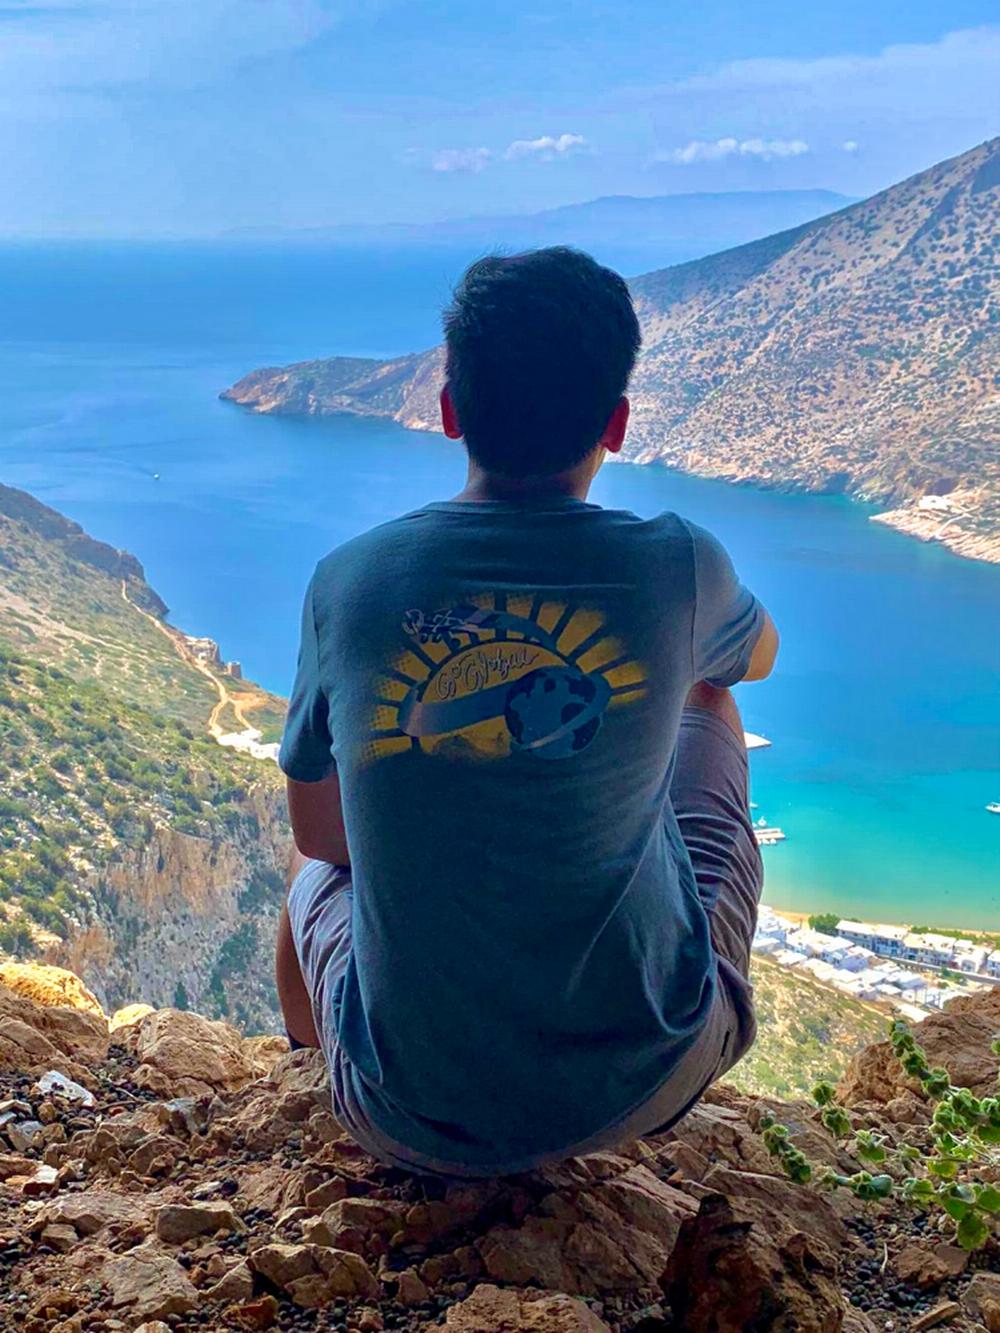 Study Abroad student displays Embry-Riddle flag in front of scenic river and distant mountains.